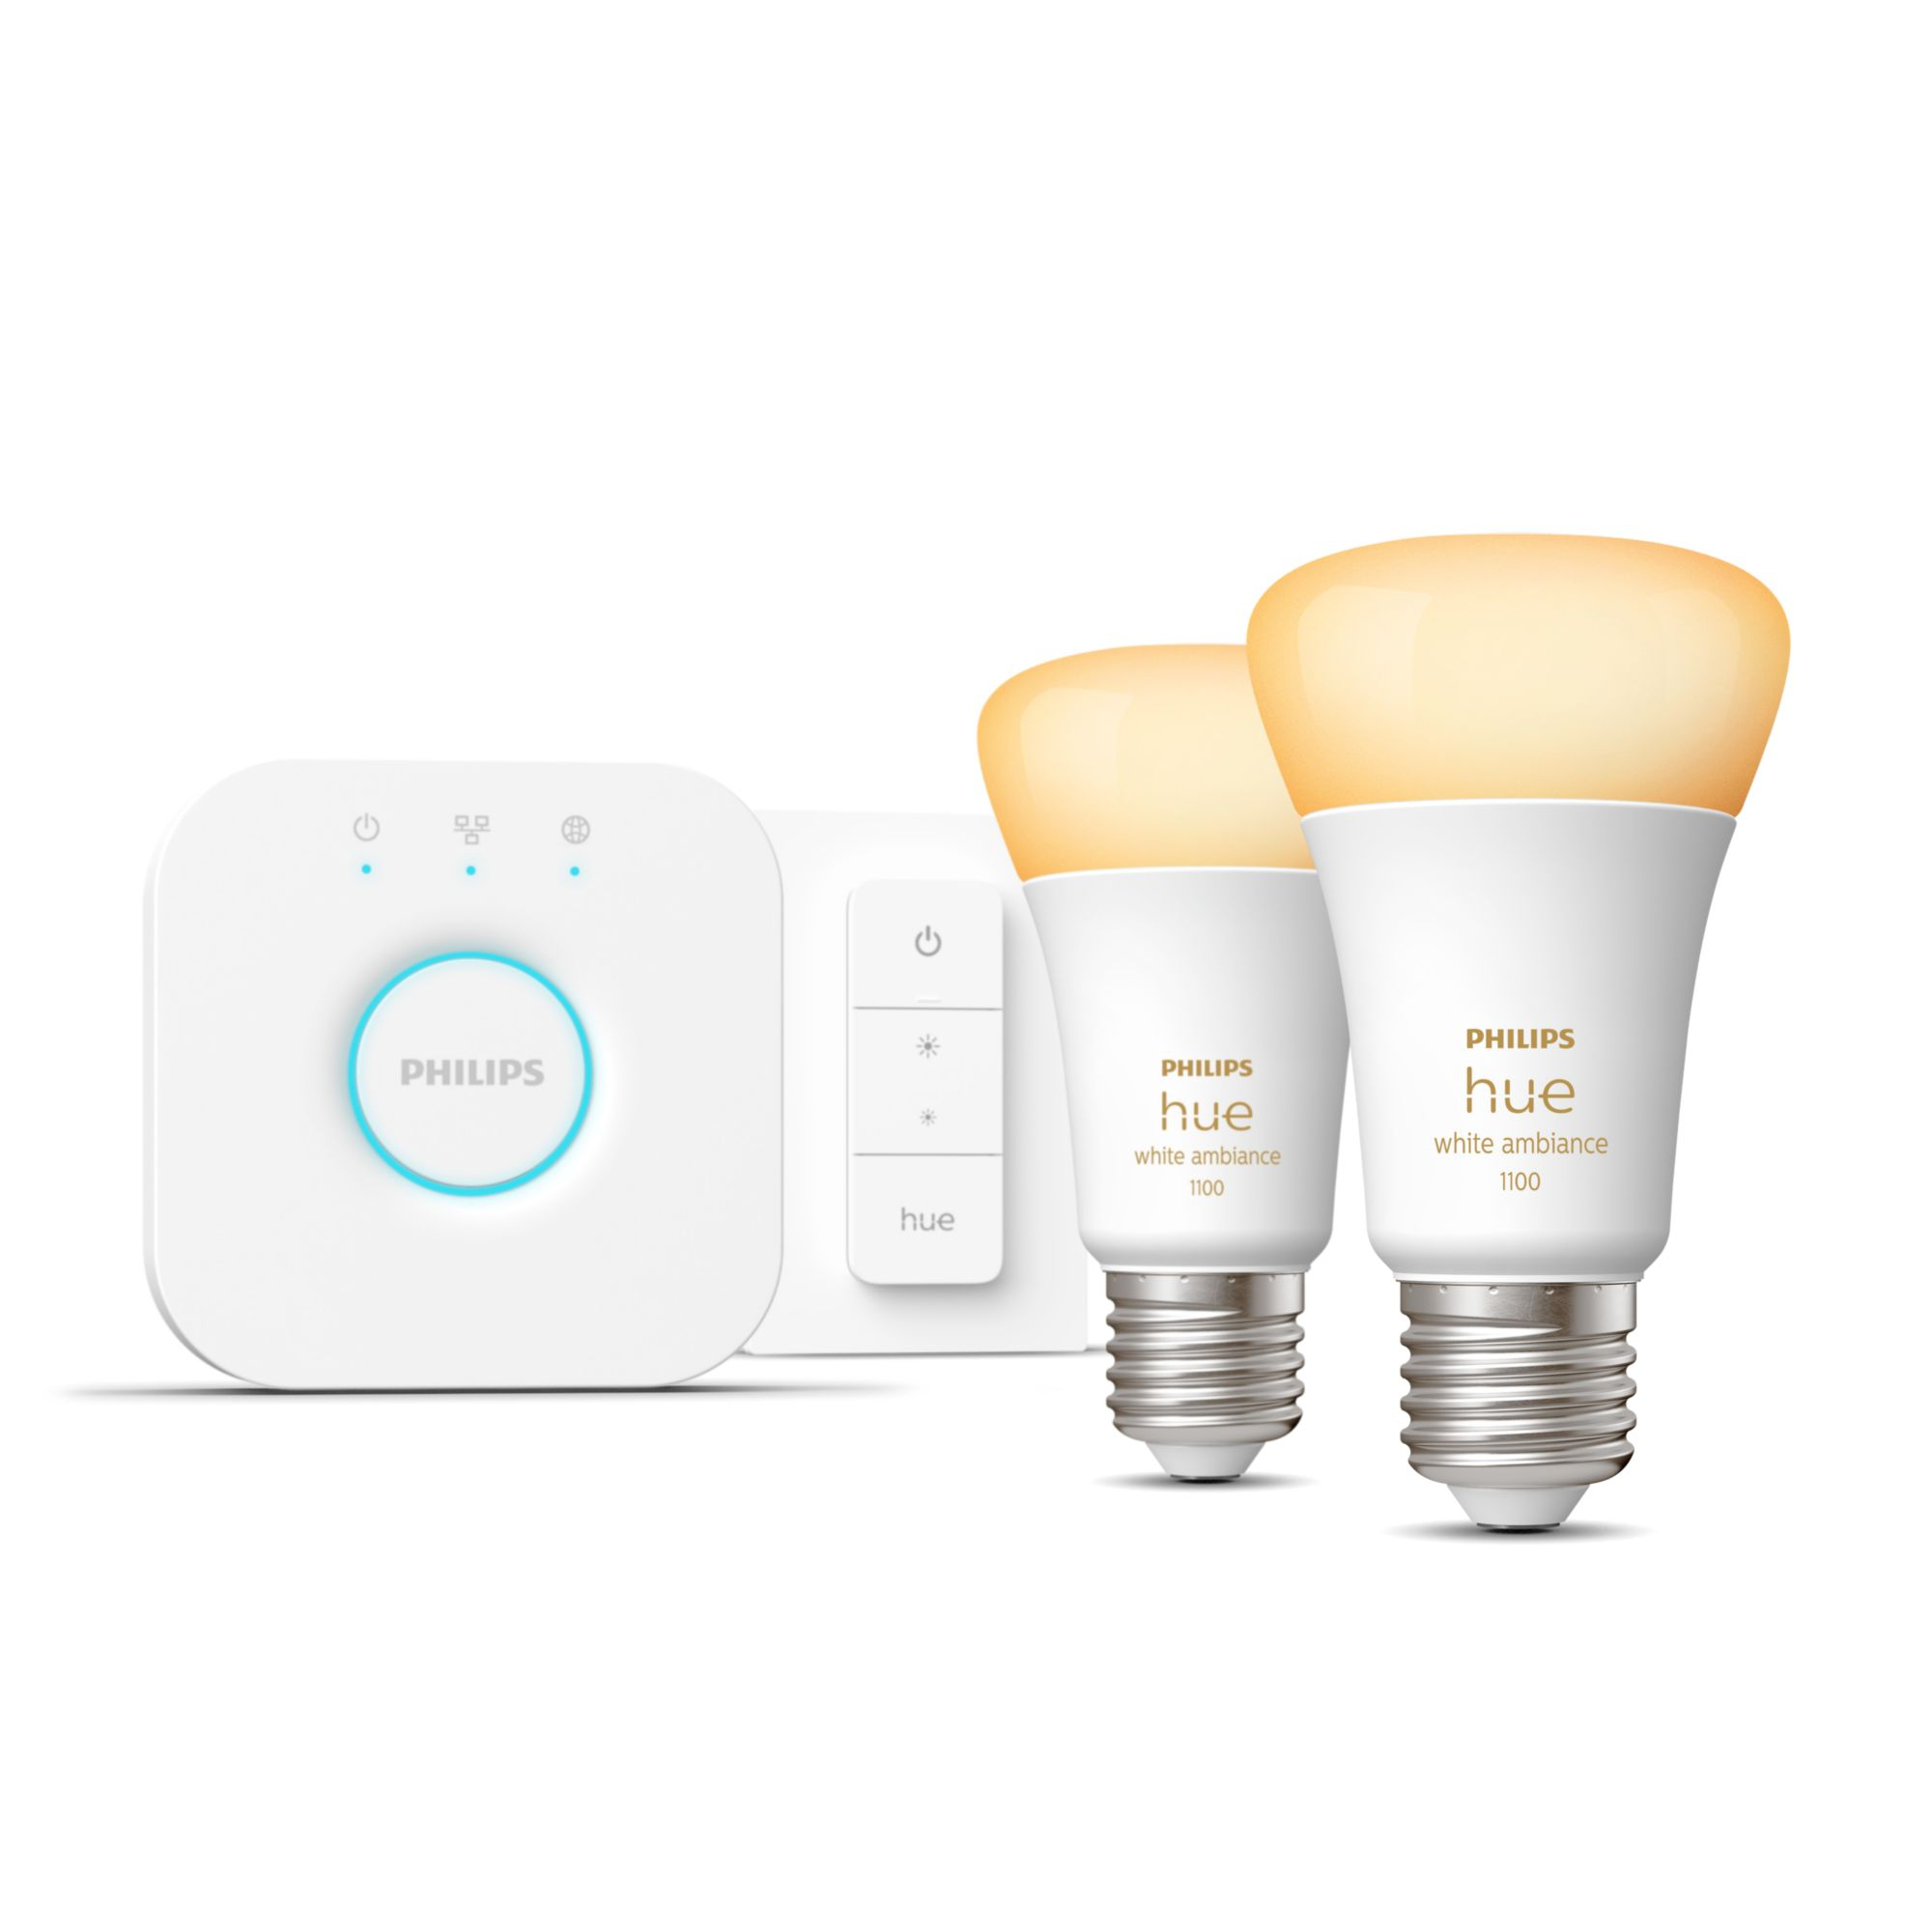 Philips by Signify Starterkit: 2 E27 slimme lampen (1100) + dimmer switch